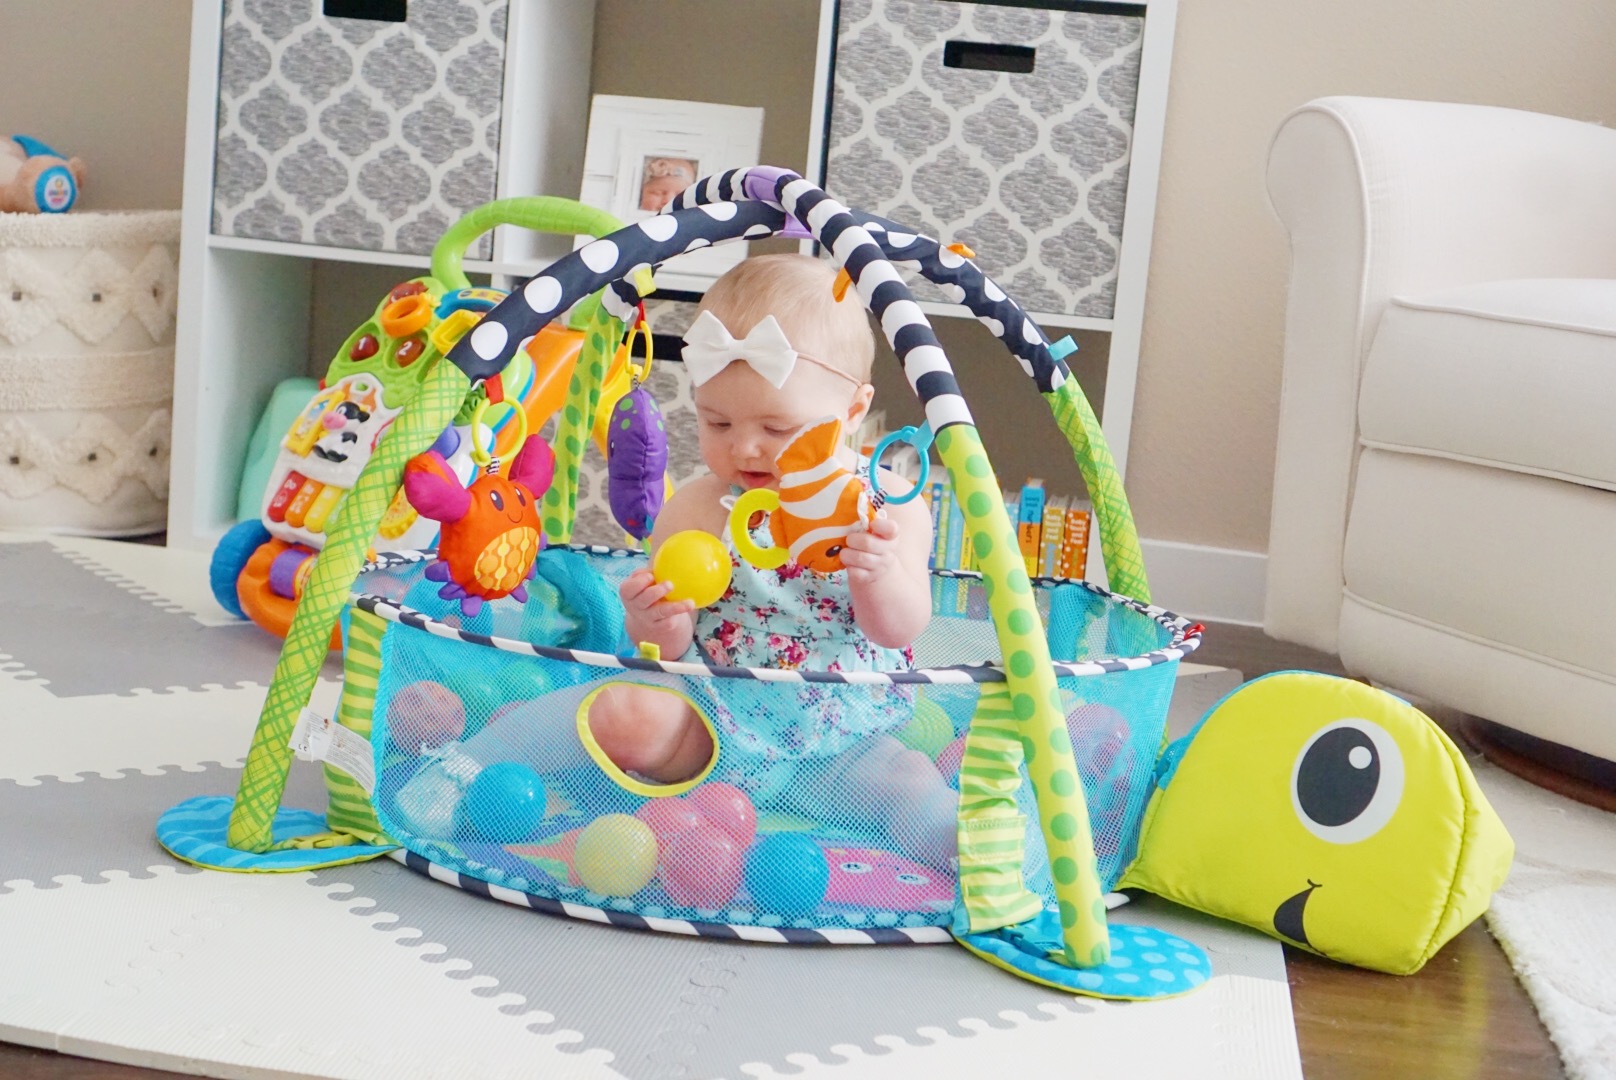 Katelyn Jones A Touch of Pink buybuy BABY Infantino Grow-With-Me Activity Gym and Ball Pit